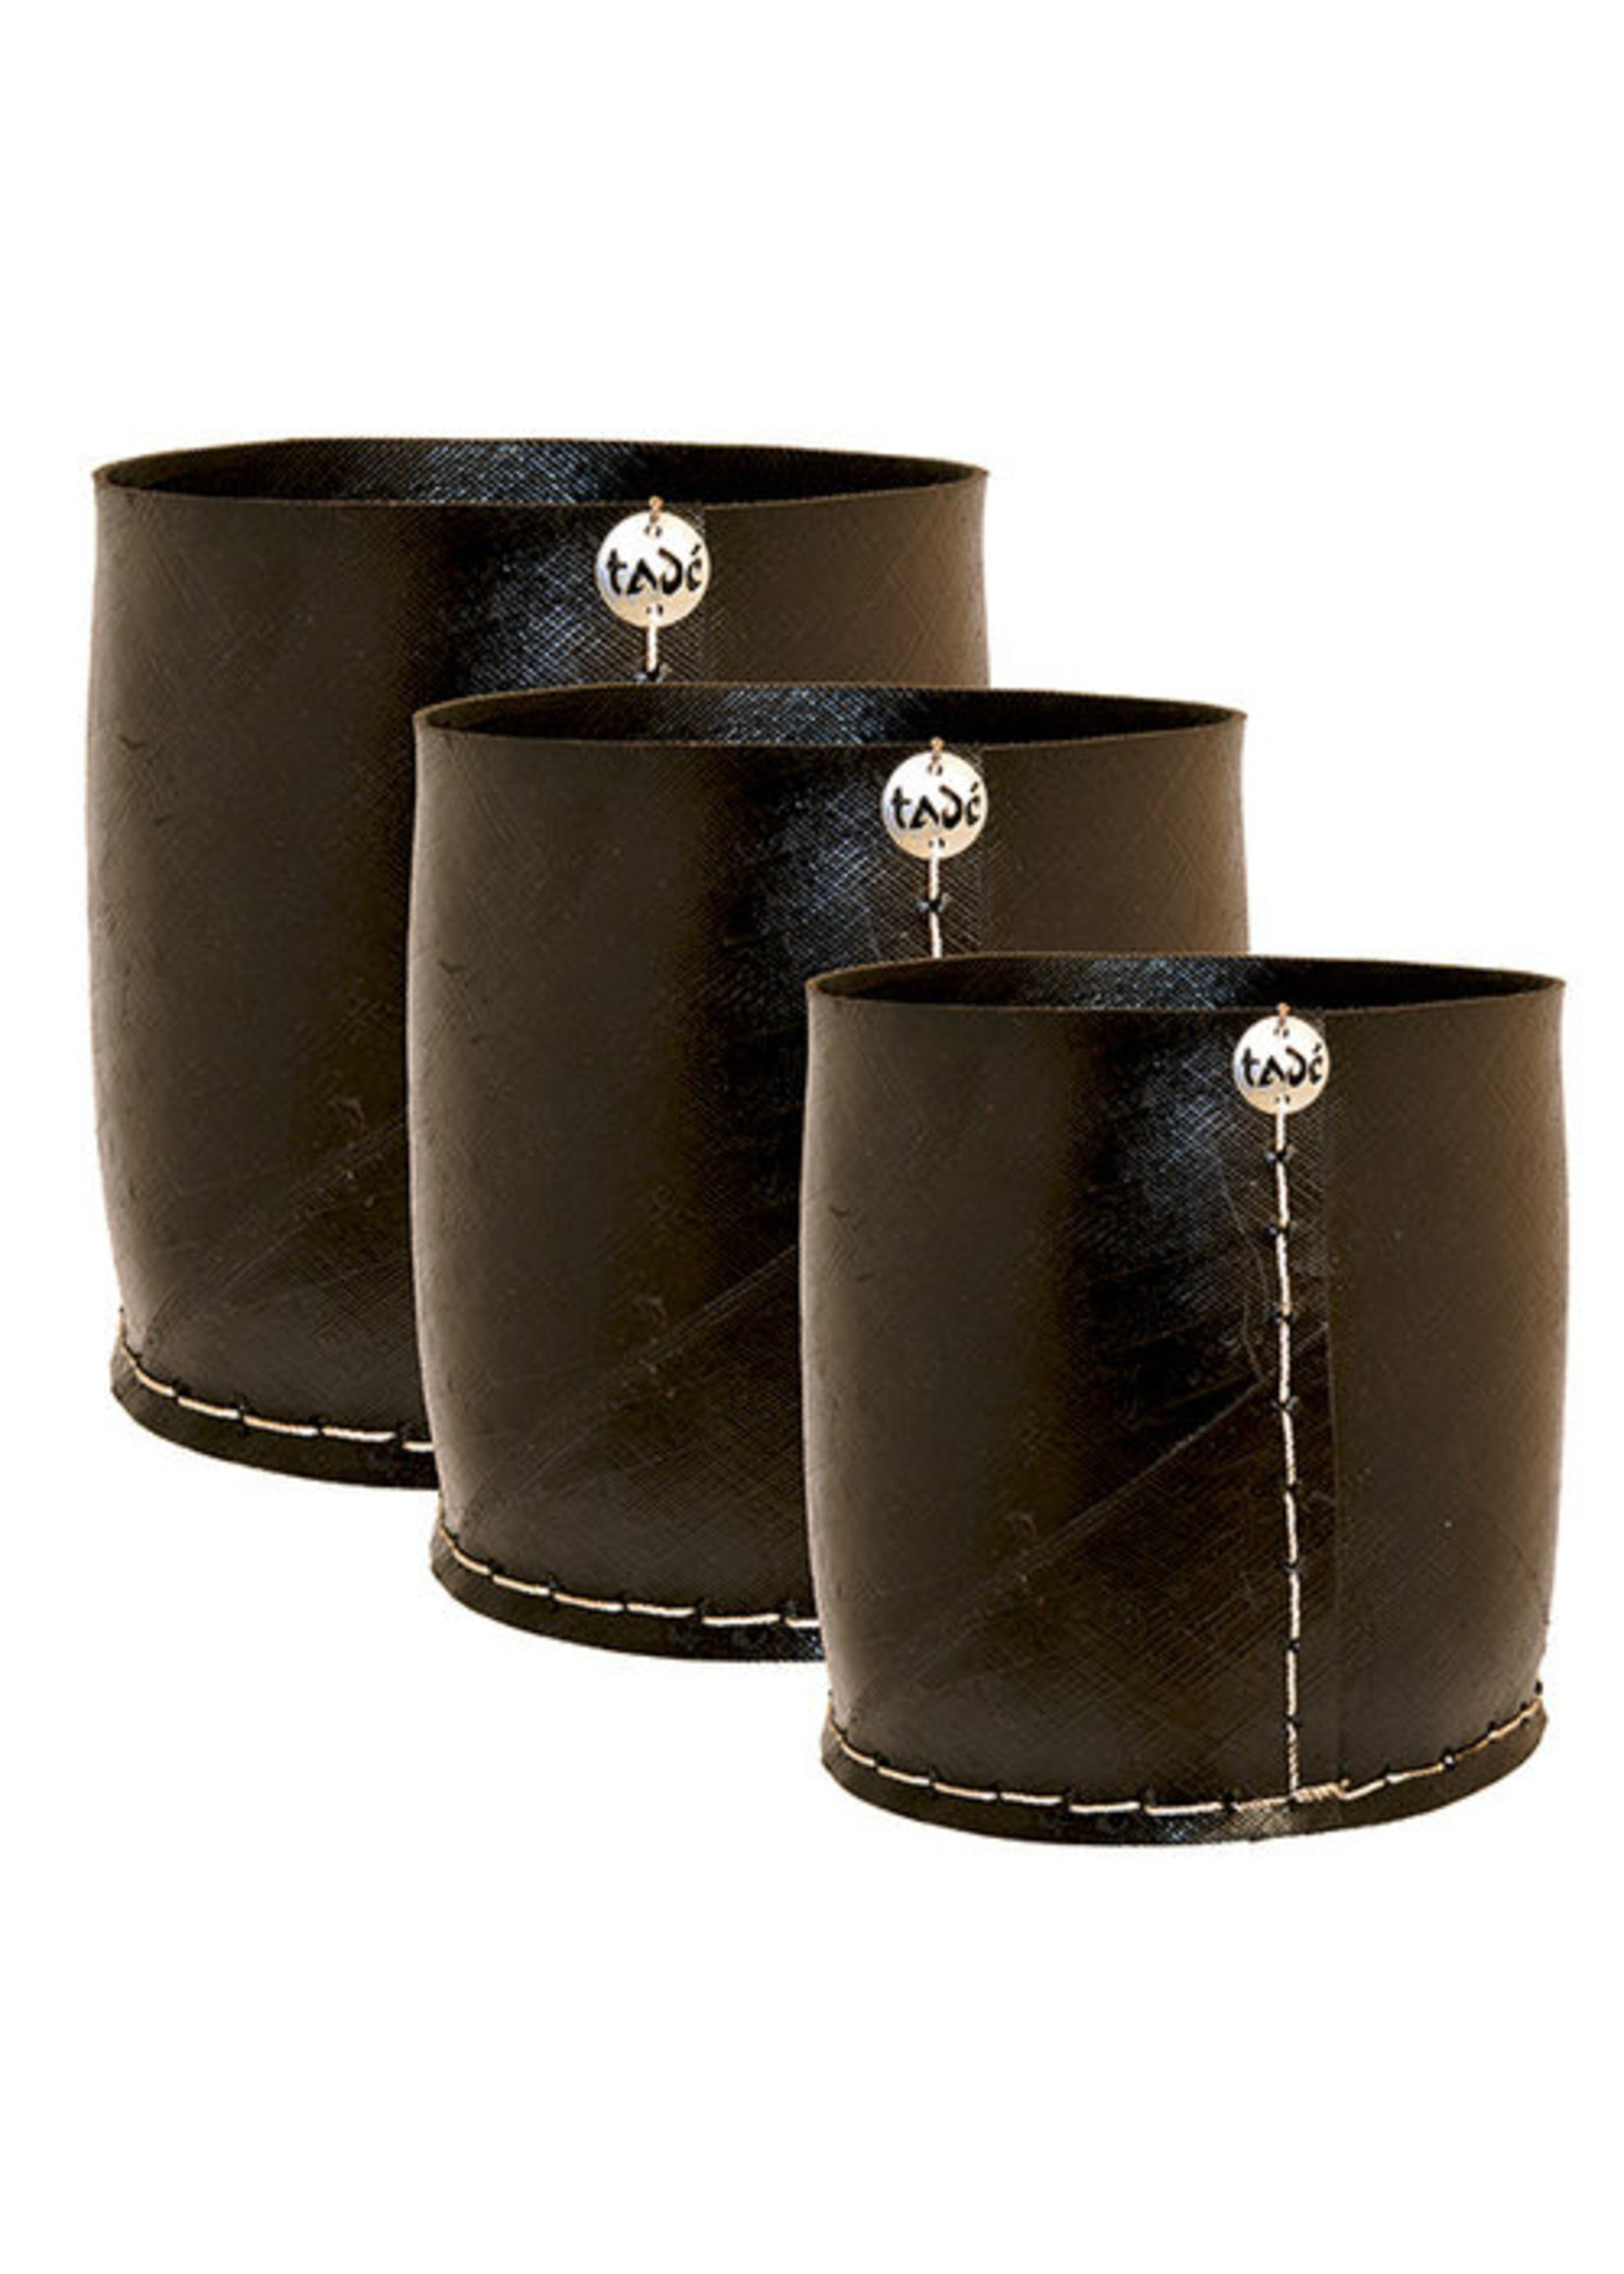 Tadé Rubber recycled flower pot straight - available in 3 sizes